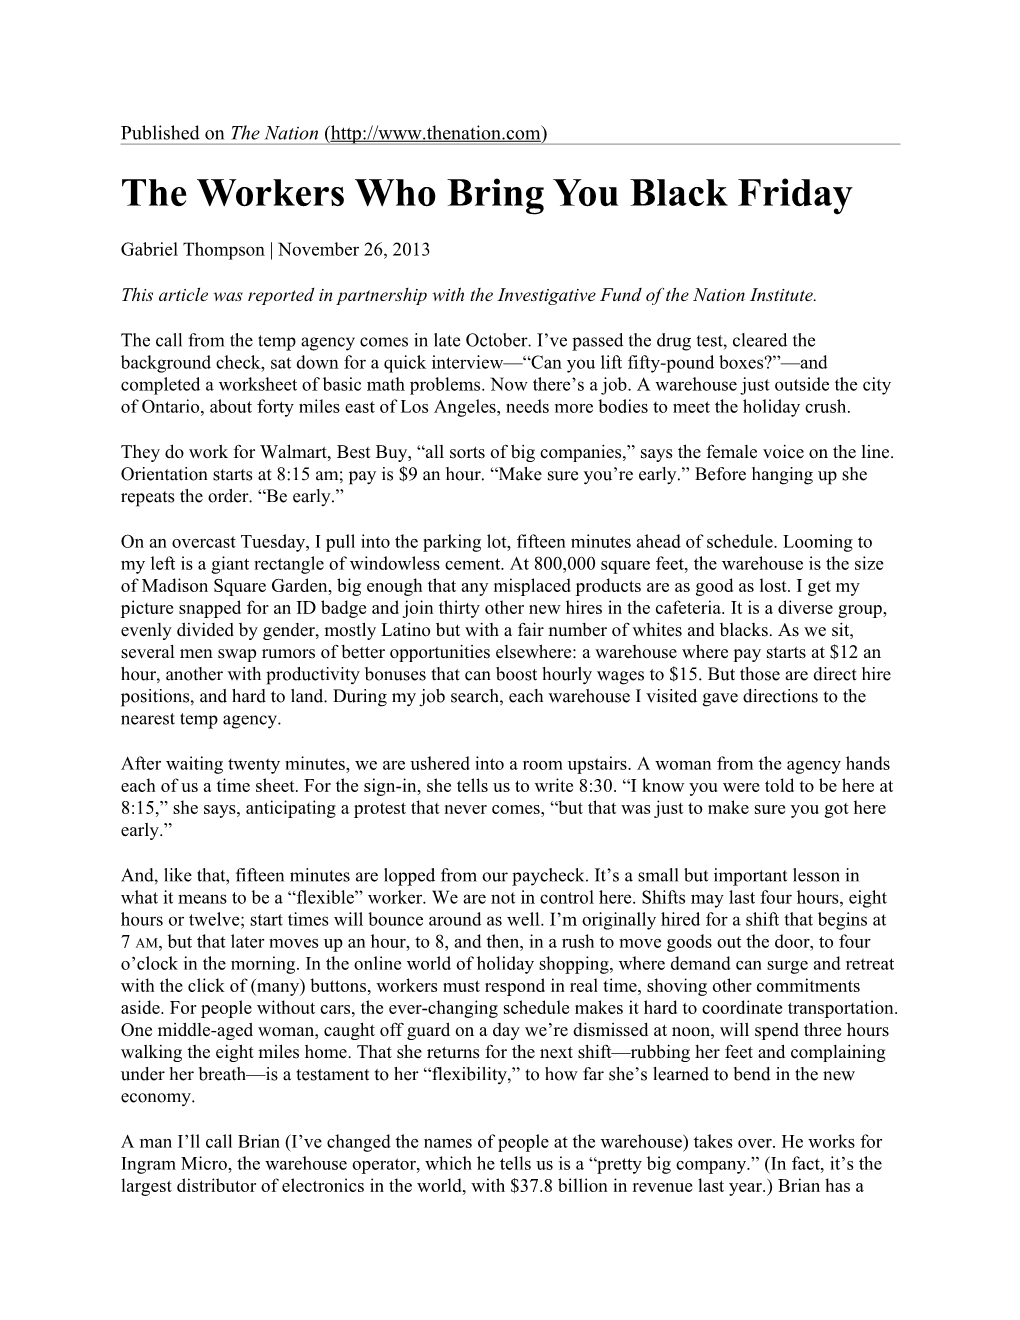 The Workers Who Bring You Black Friday